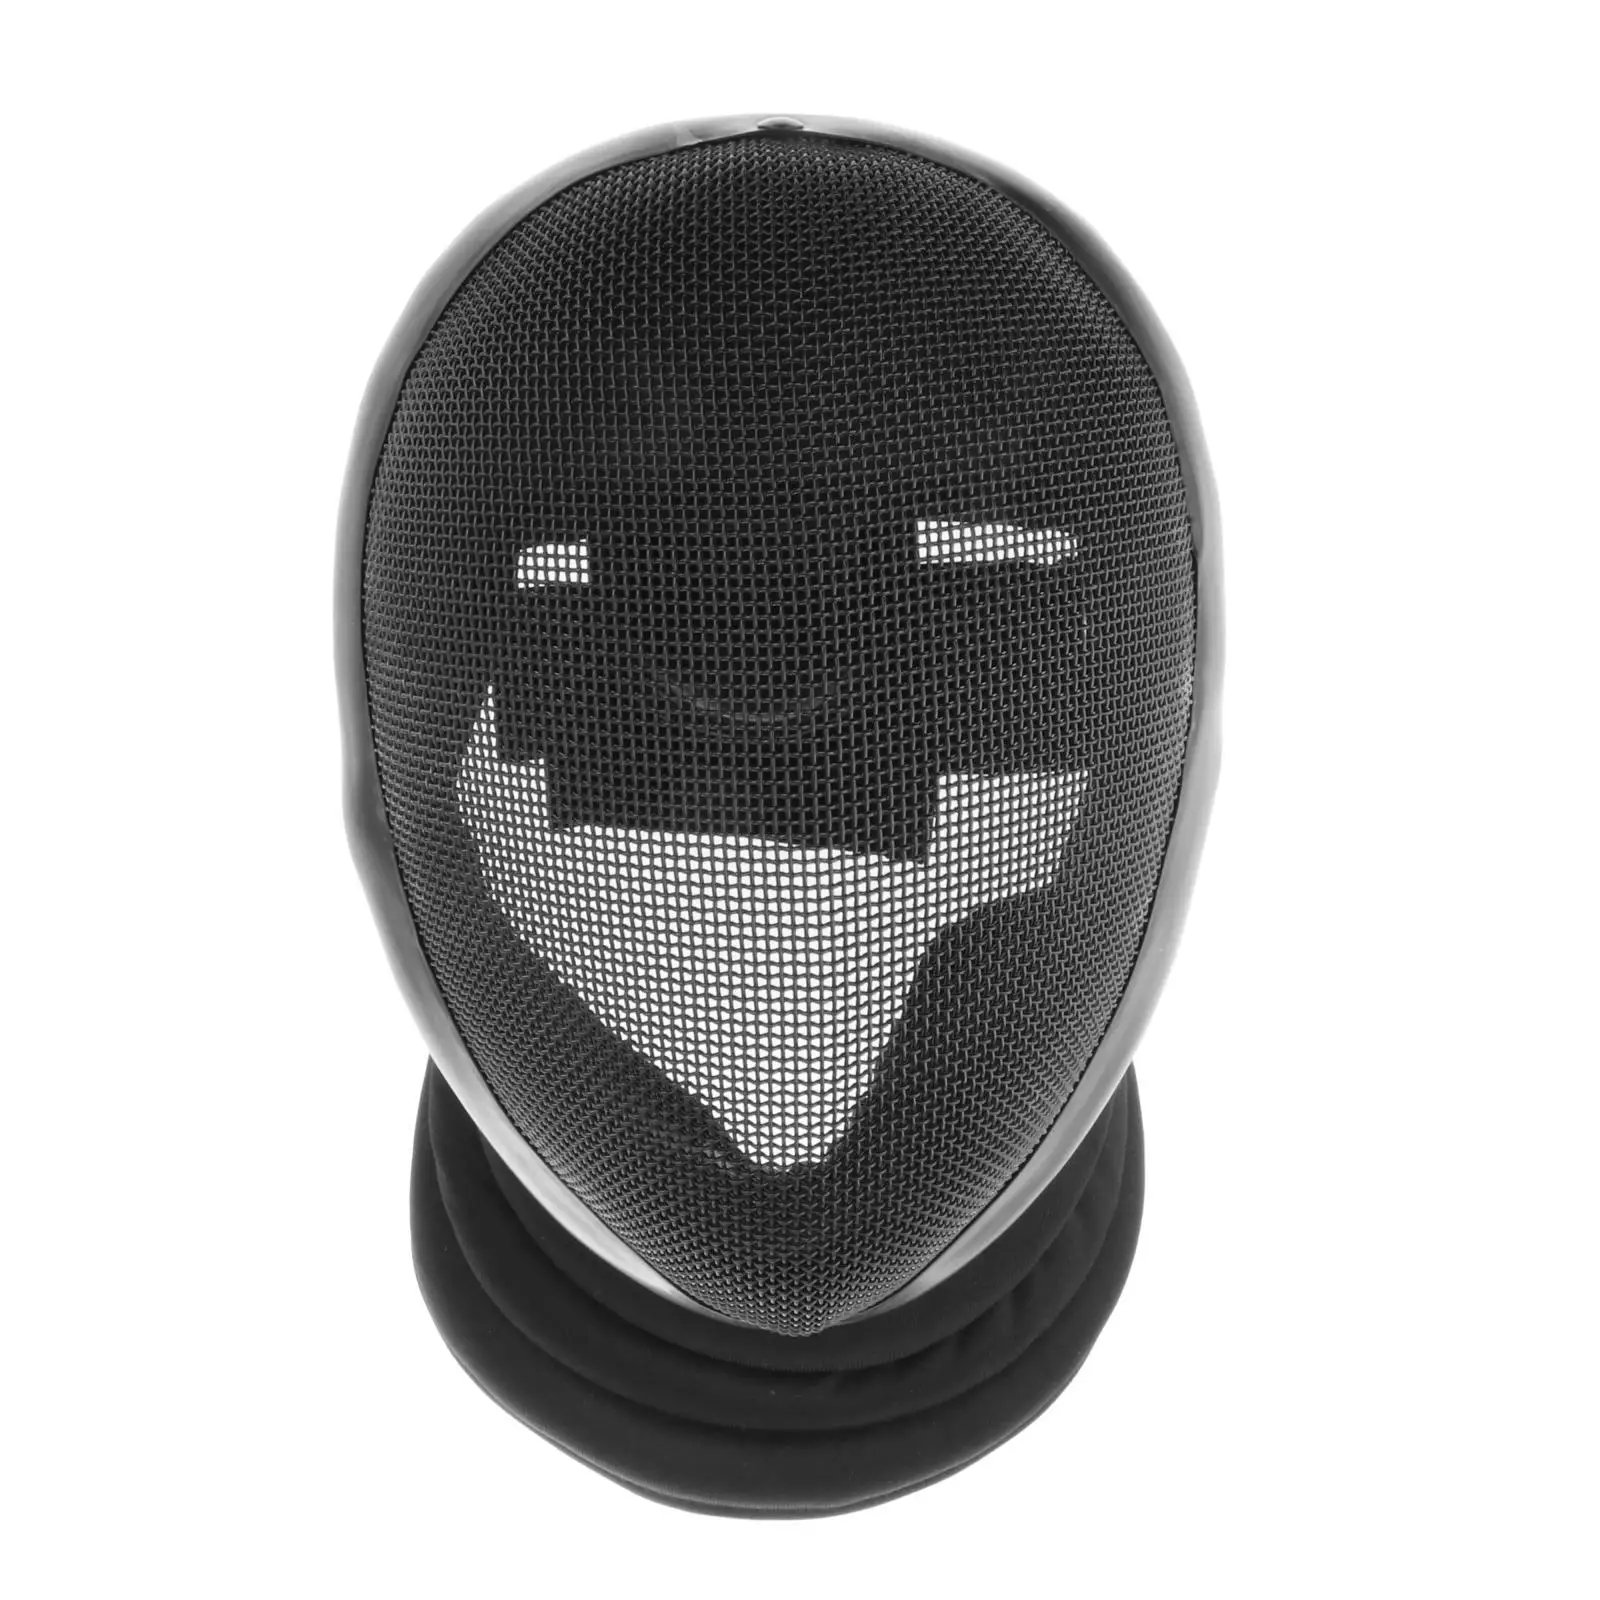 Fencing Mask Comfort Portable Protect Face Protect for Sports Accessories Practice